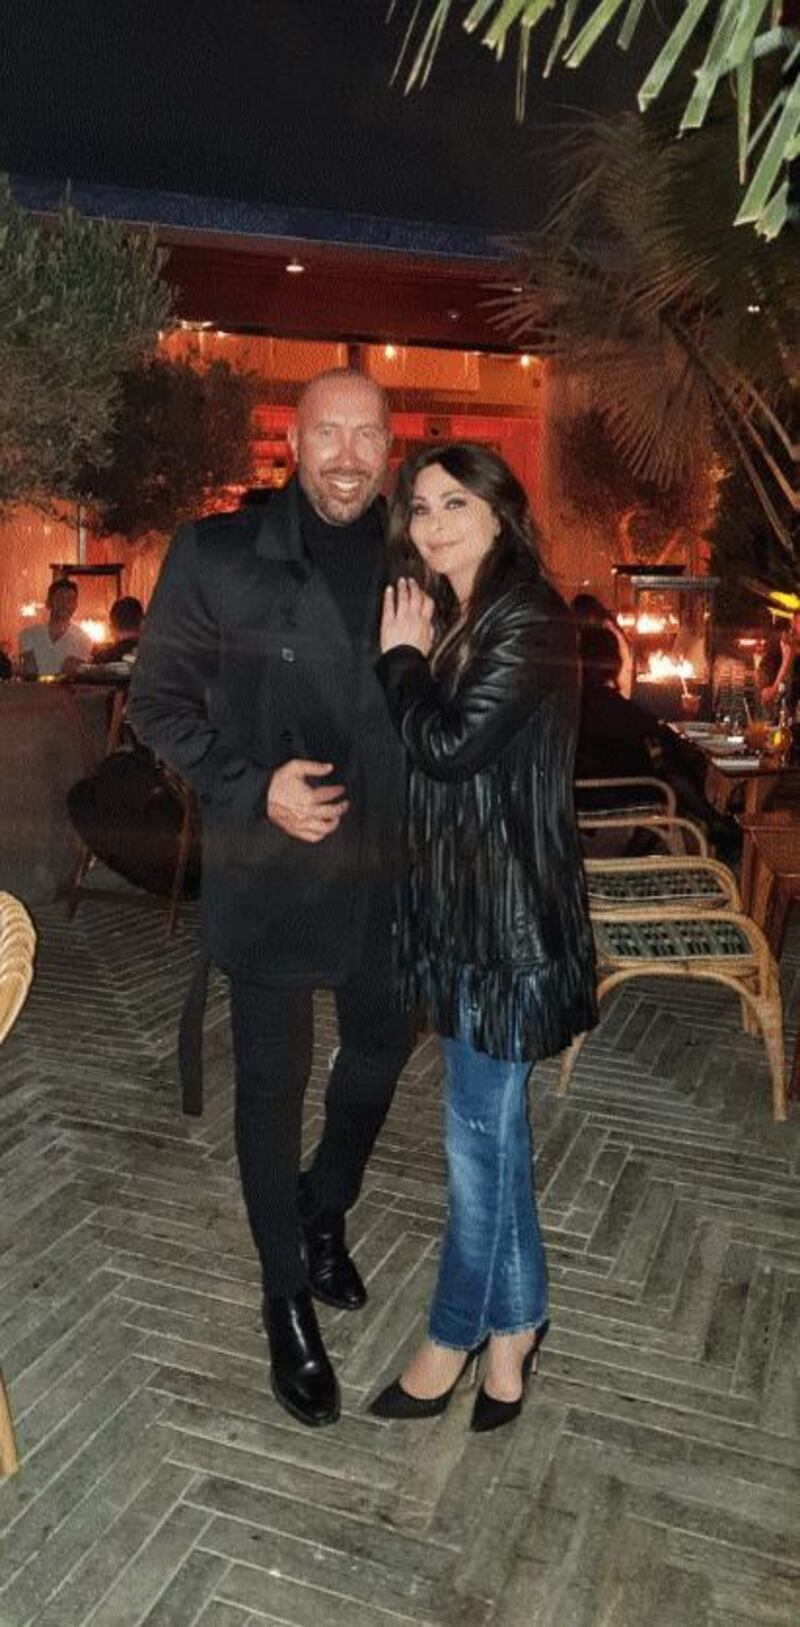 Dubai regular, Elissa, is back in town! On January 30 the Lebanese singer enjoyed dinner at La Cantine du Faubourg with friends. Twitter / Elissa   